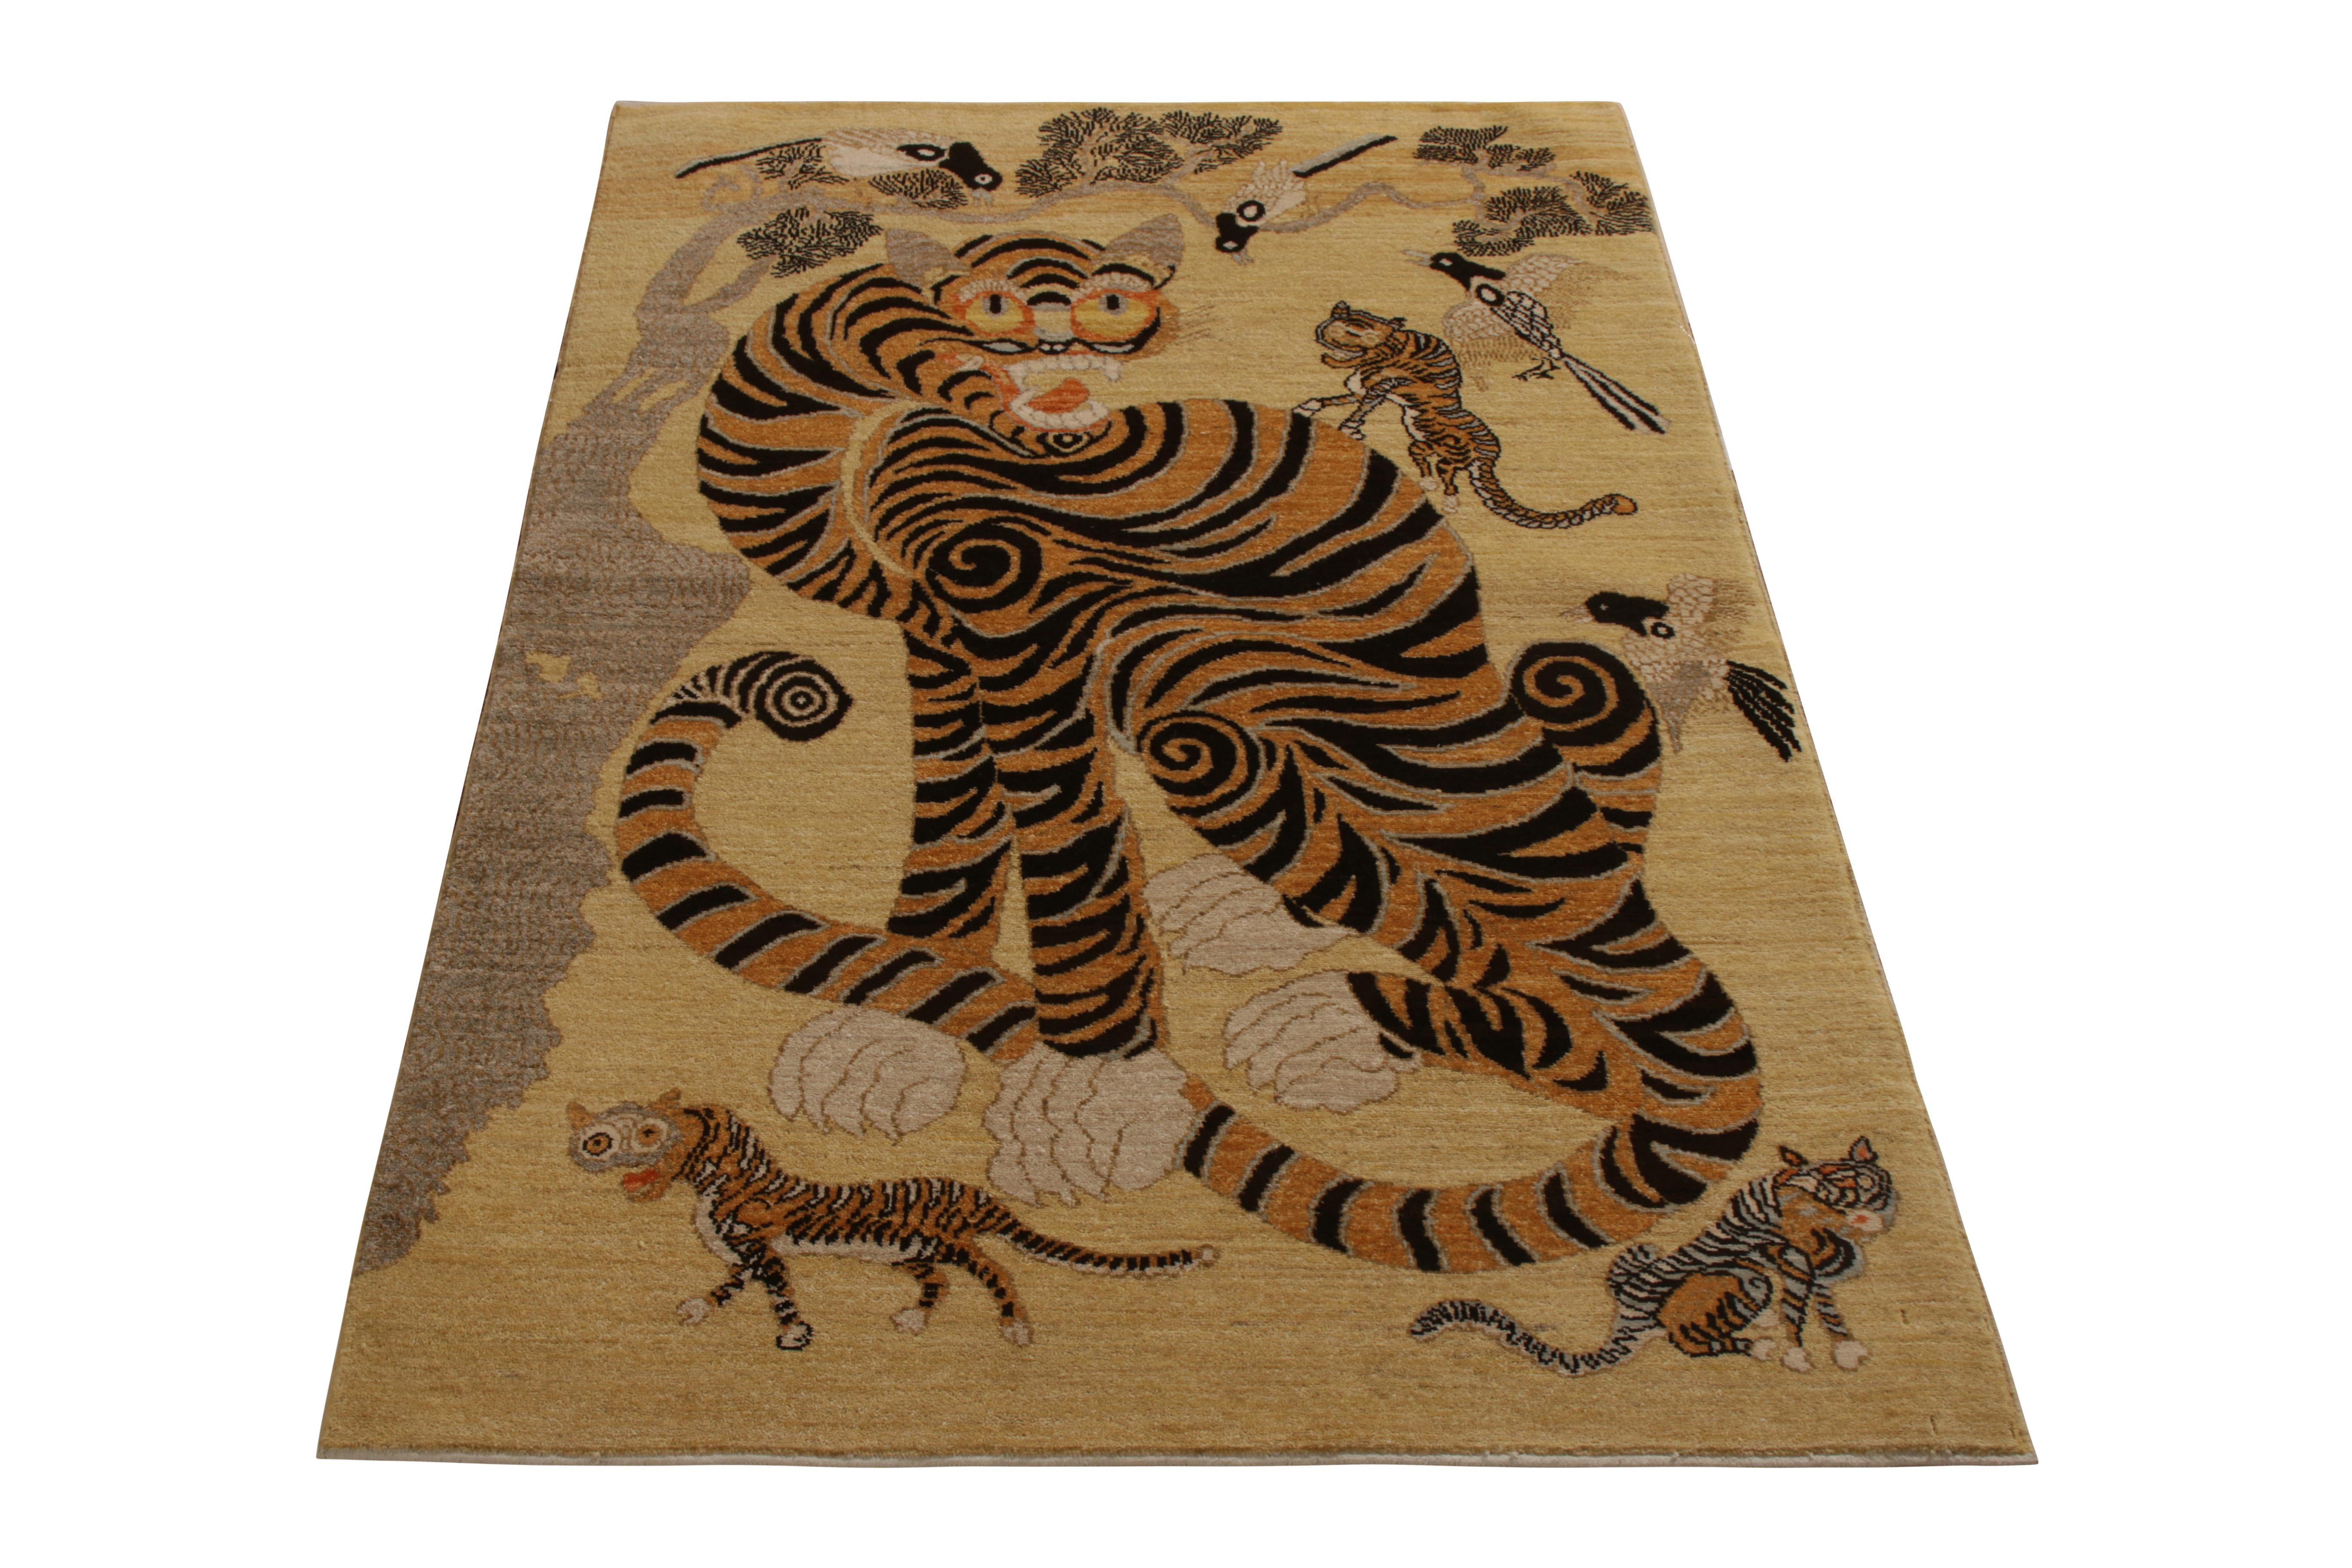 An ode to classic Oriental Tiger styles from the titular new collection by Rug & Kilim. Hand knotted in wool, available in 11-12 weeks upon request in all color and size variations. 

On the design: Heavily inspired by folk art, this 3x5 Tiger rug